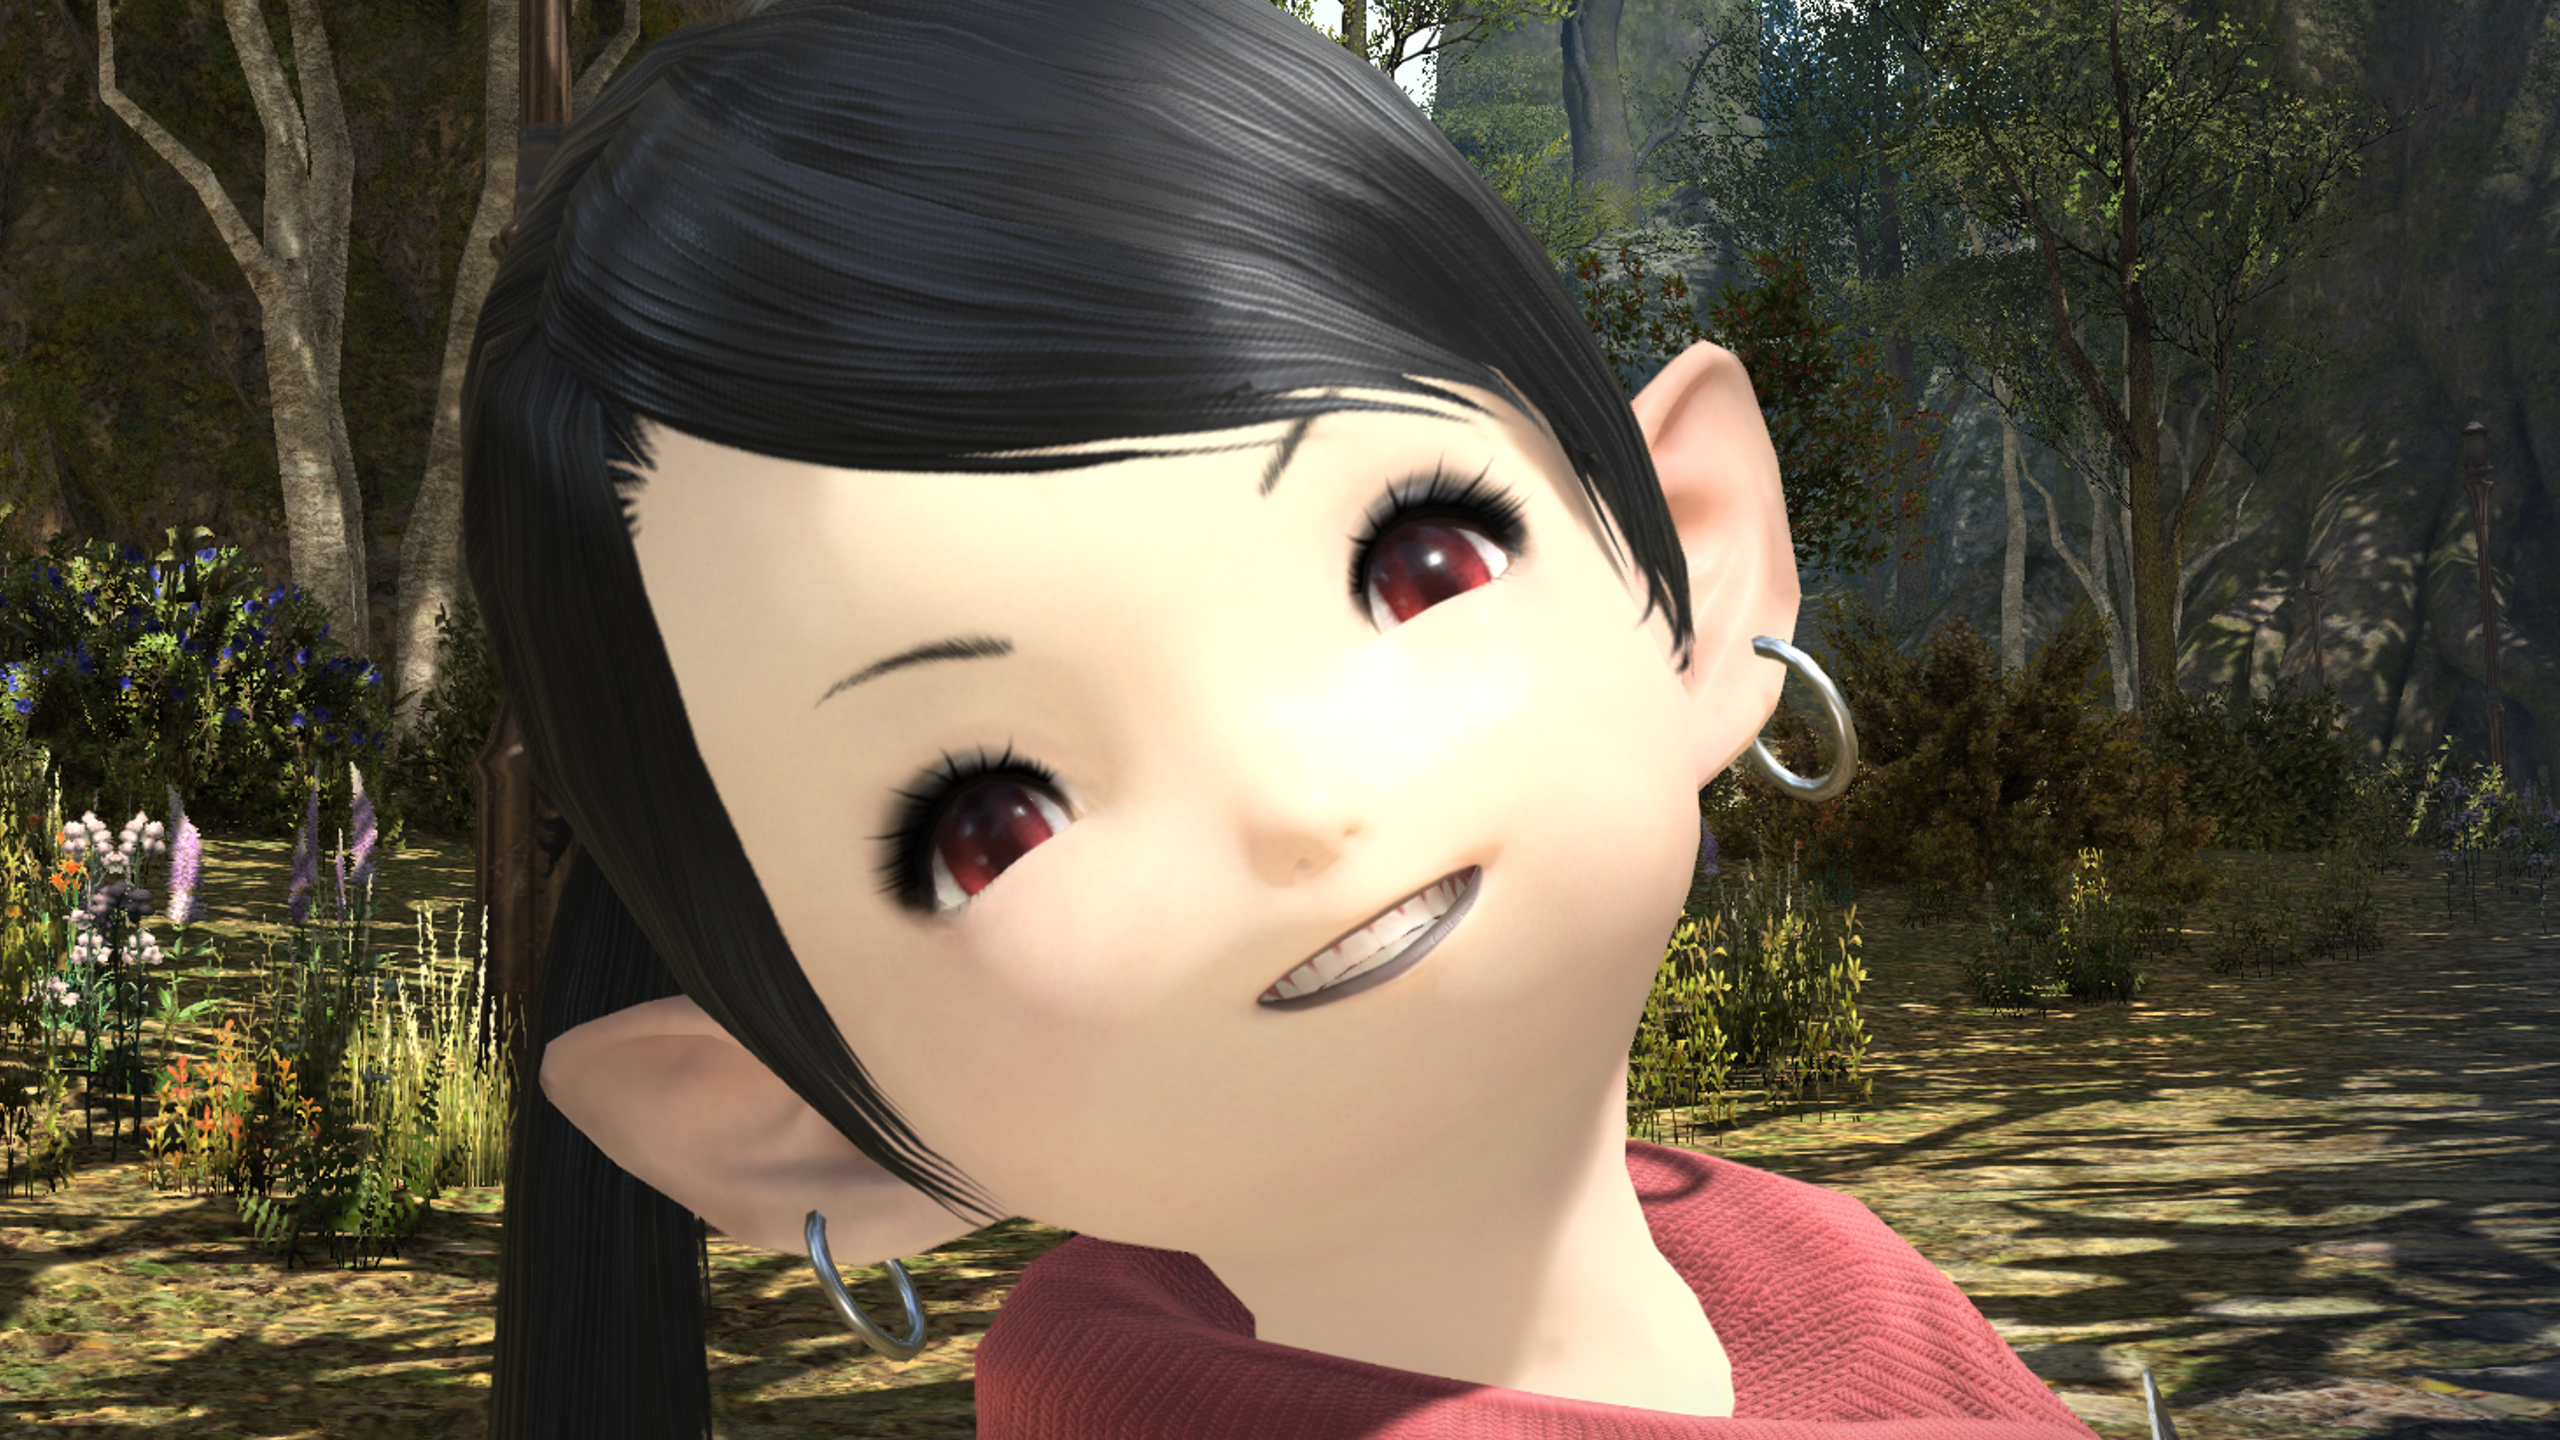  Final Fantasy 14 is helping us poor souls who spend hours creating a character only to absolutely hate it by giving its transformation potion a 60-minute grace period 